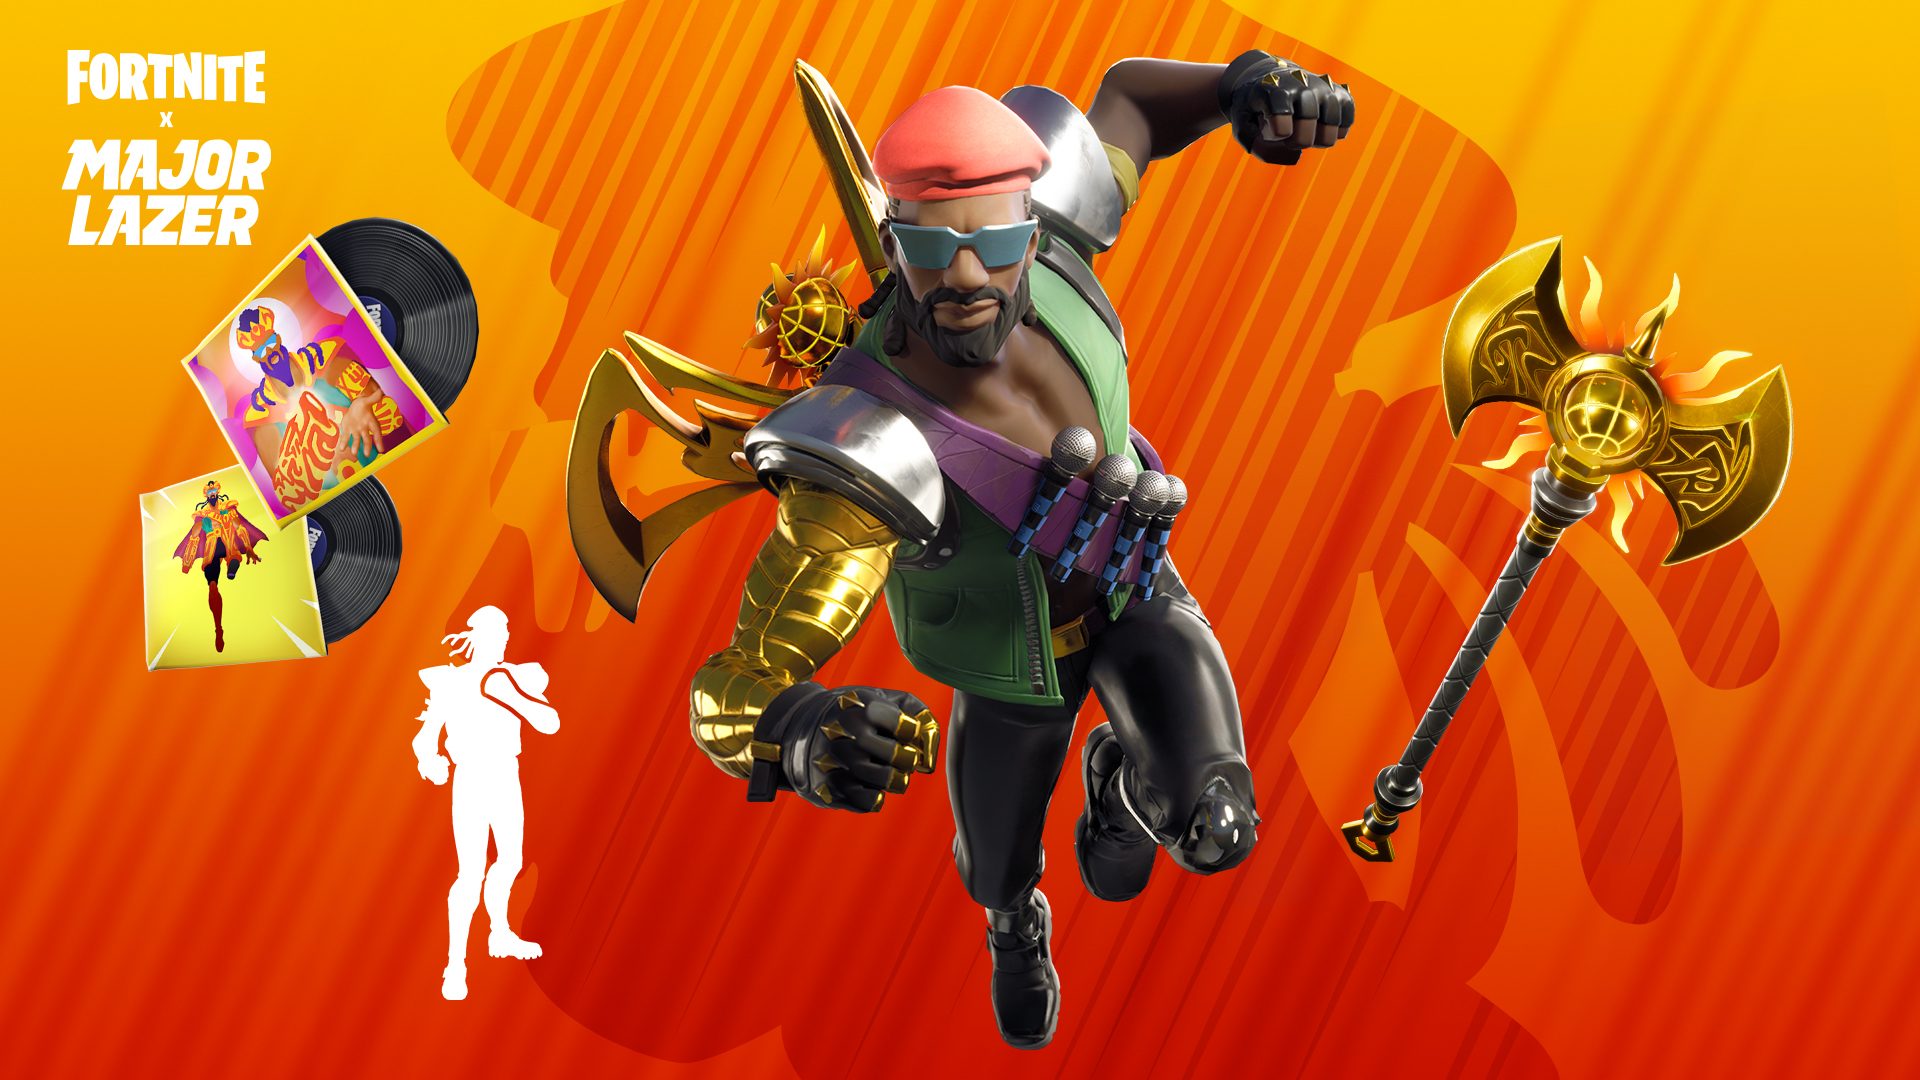 Party Star Fortnite Wallpapers